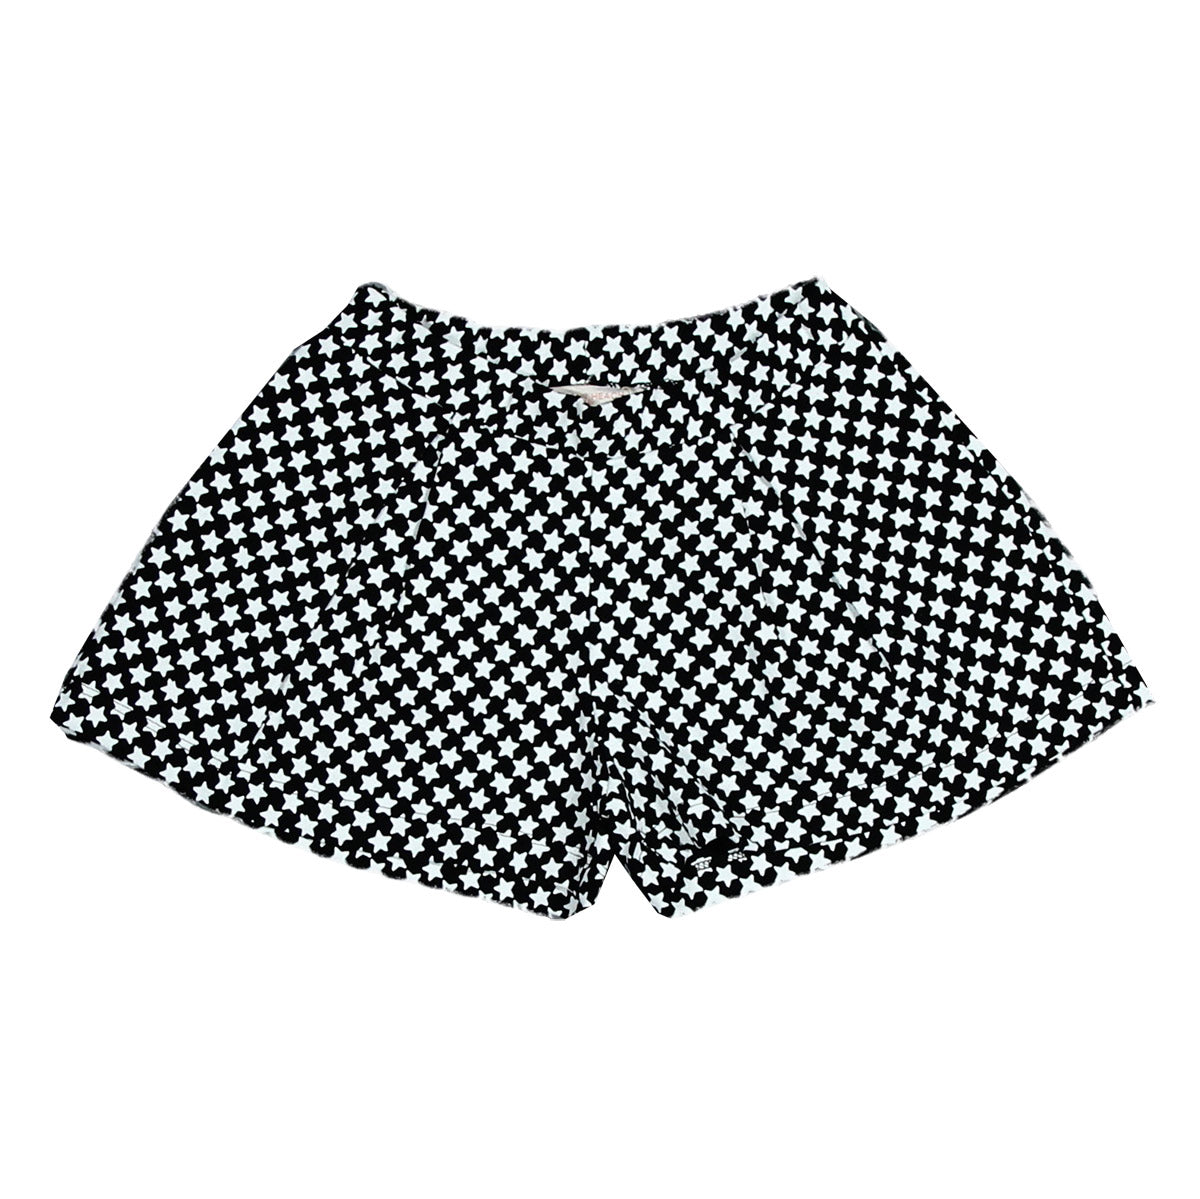 Shorts from the Silvian Heach Kids girl's clothing line, with a beautiful star pattern and a wide...